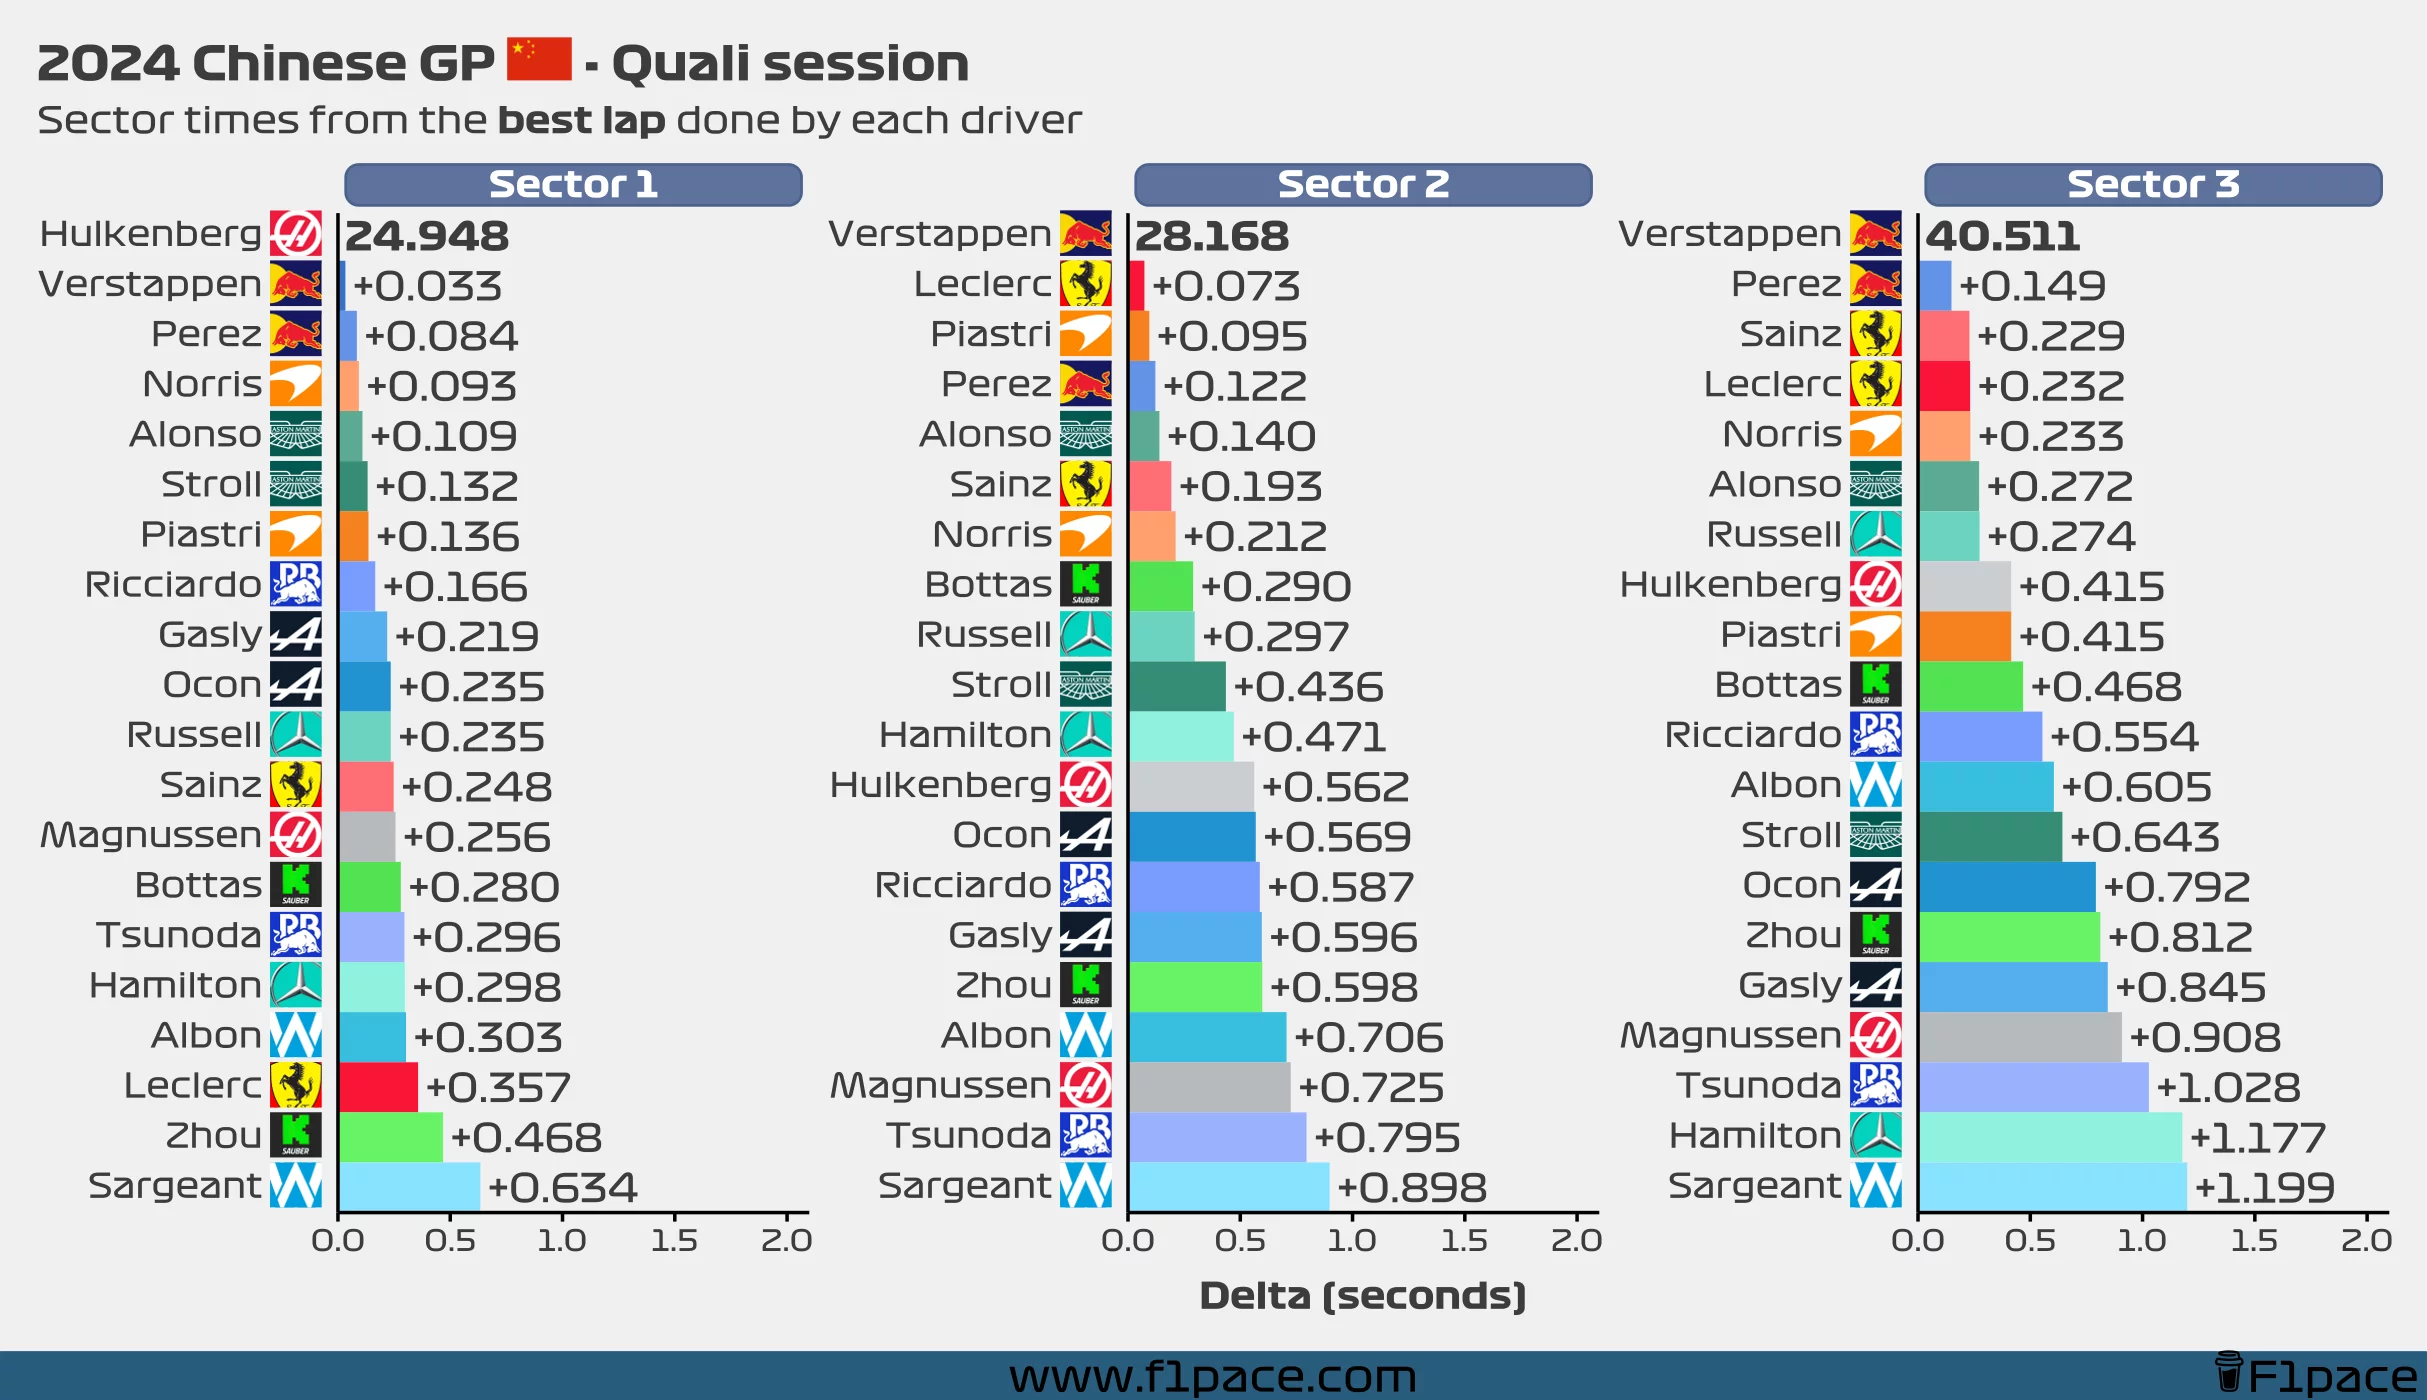 Sector times from the best lap done by each driver